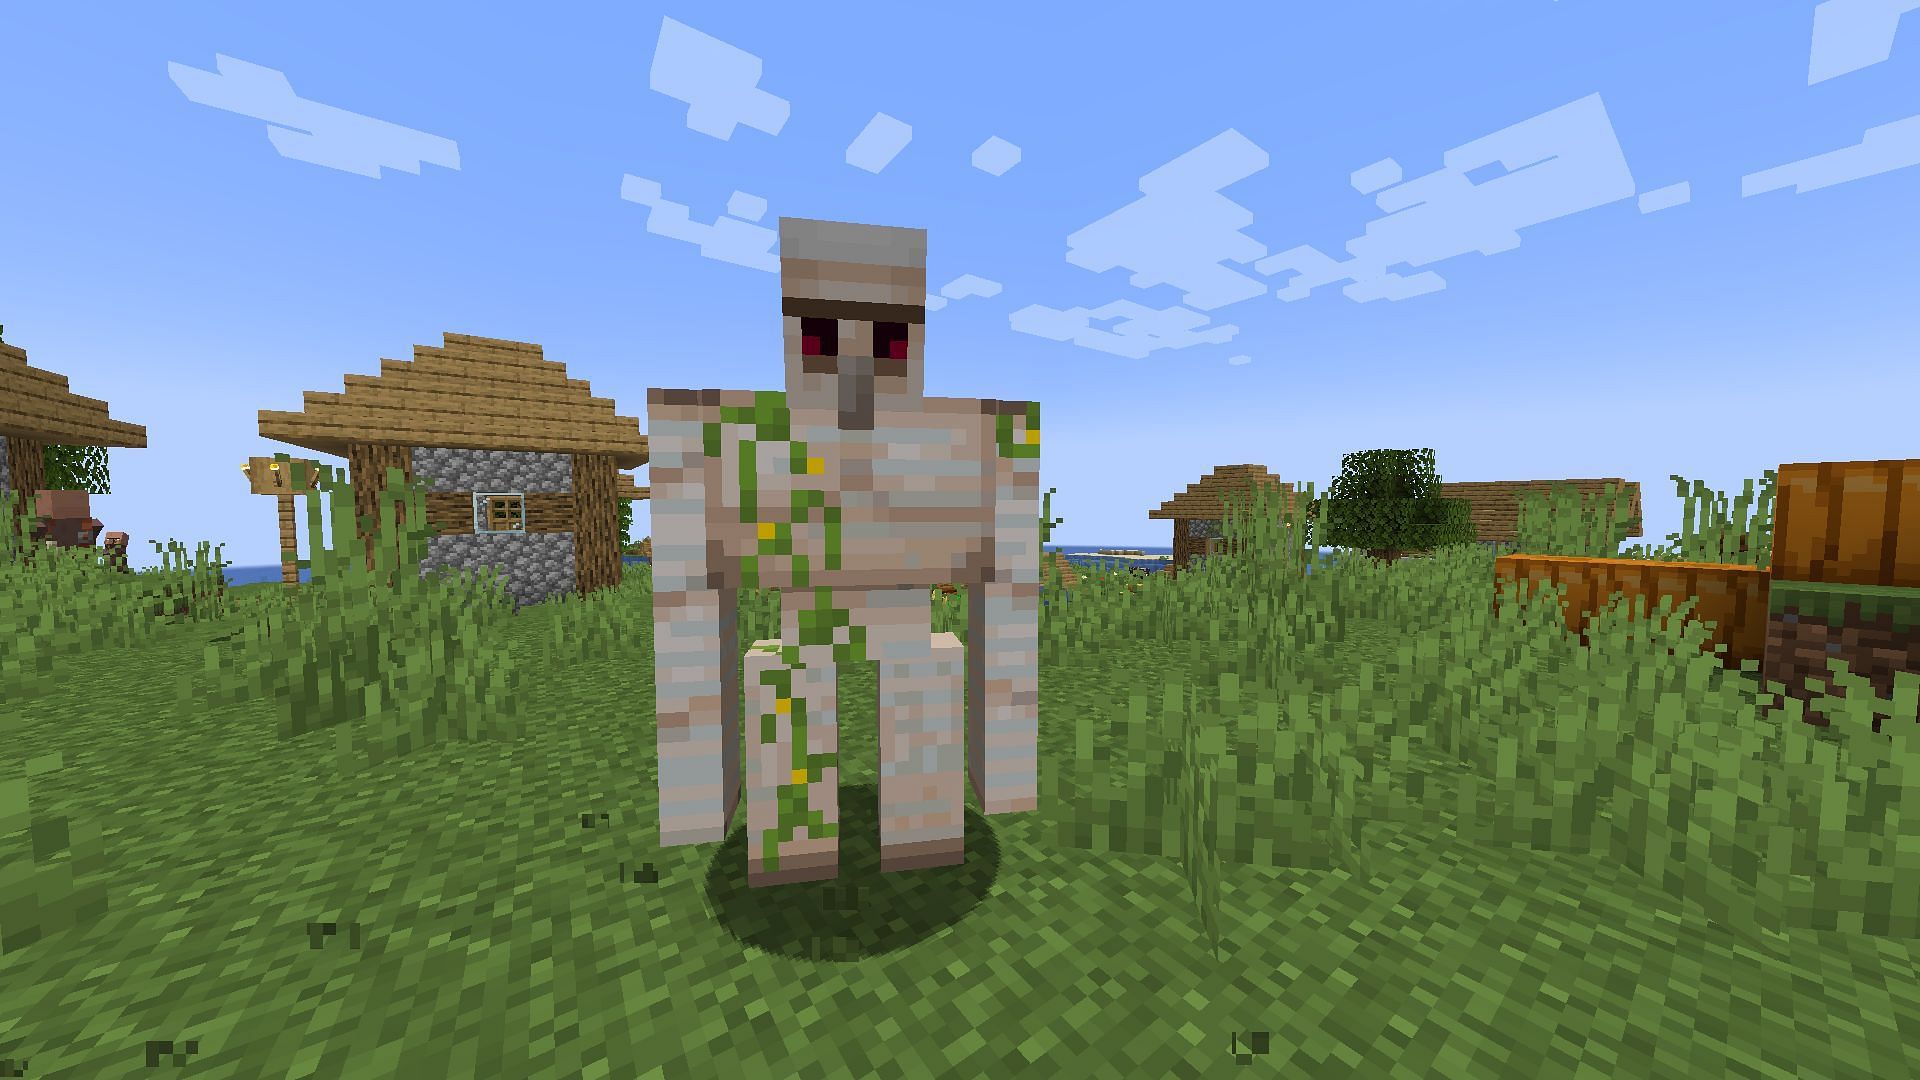 Iron golems are extremely powerful and should not be provoked in Minecraft (Image via Mojang)